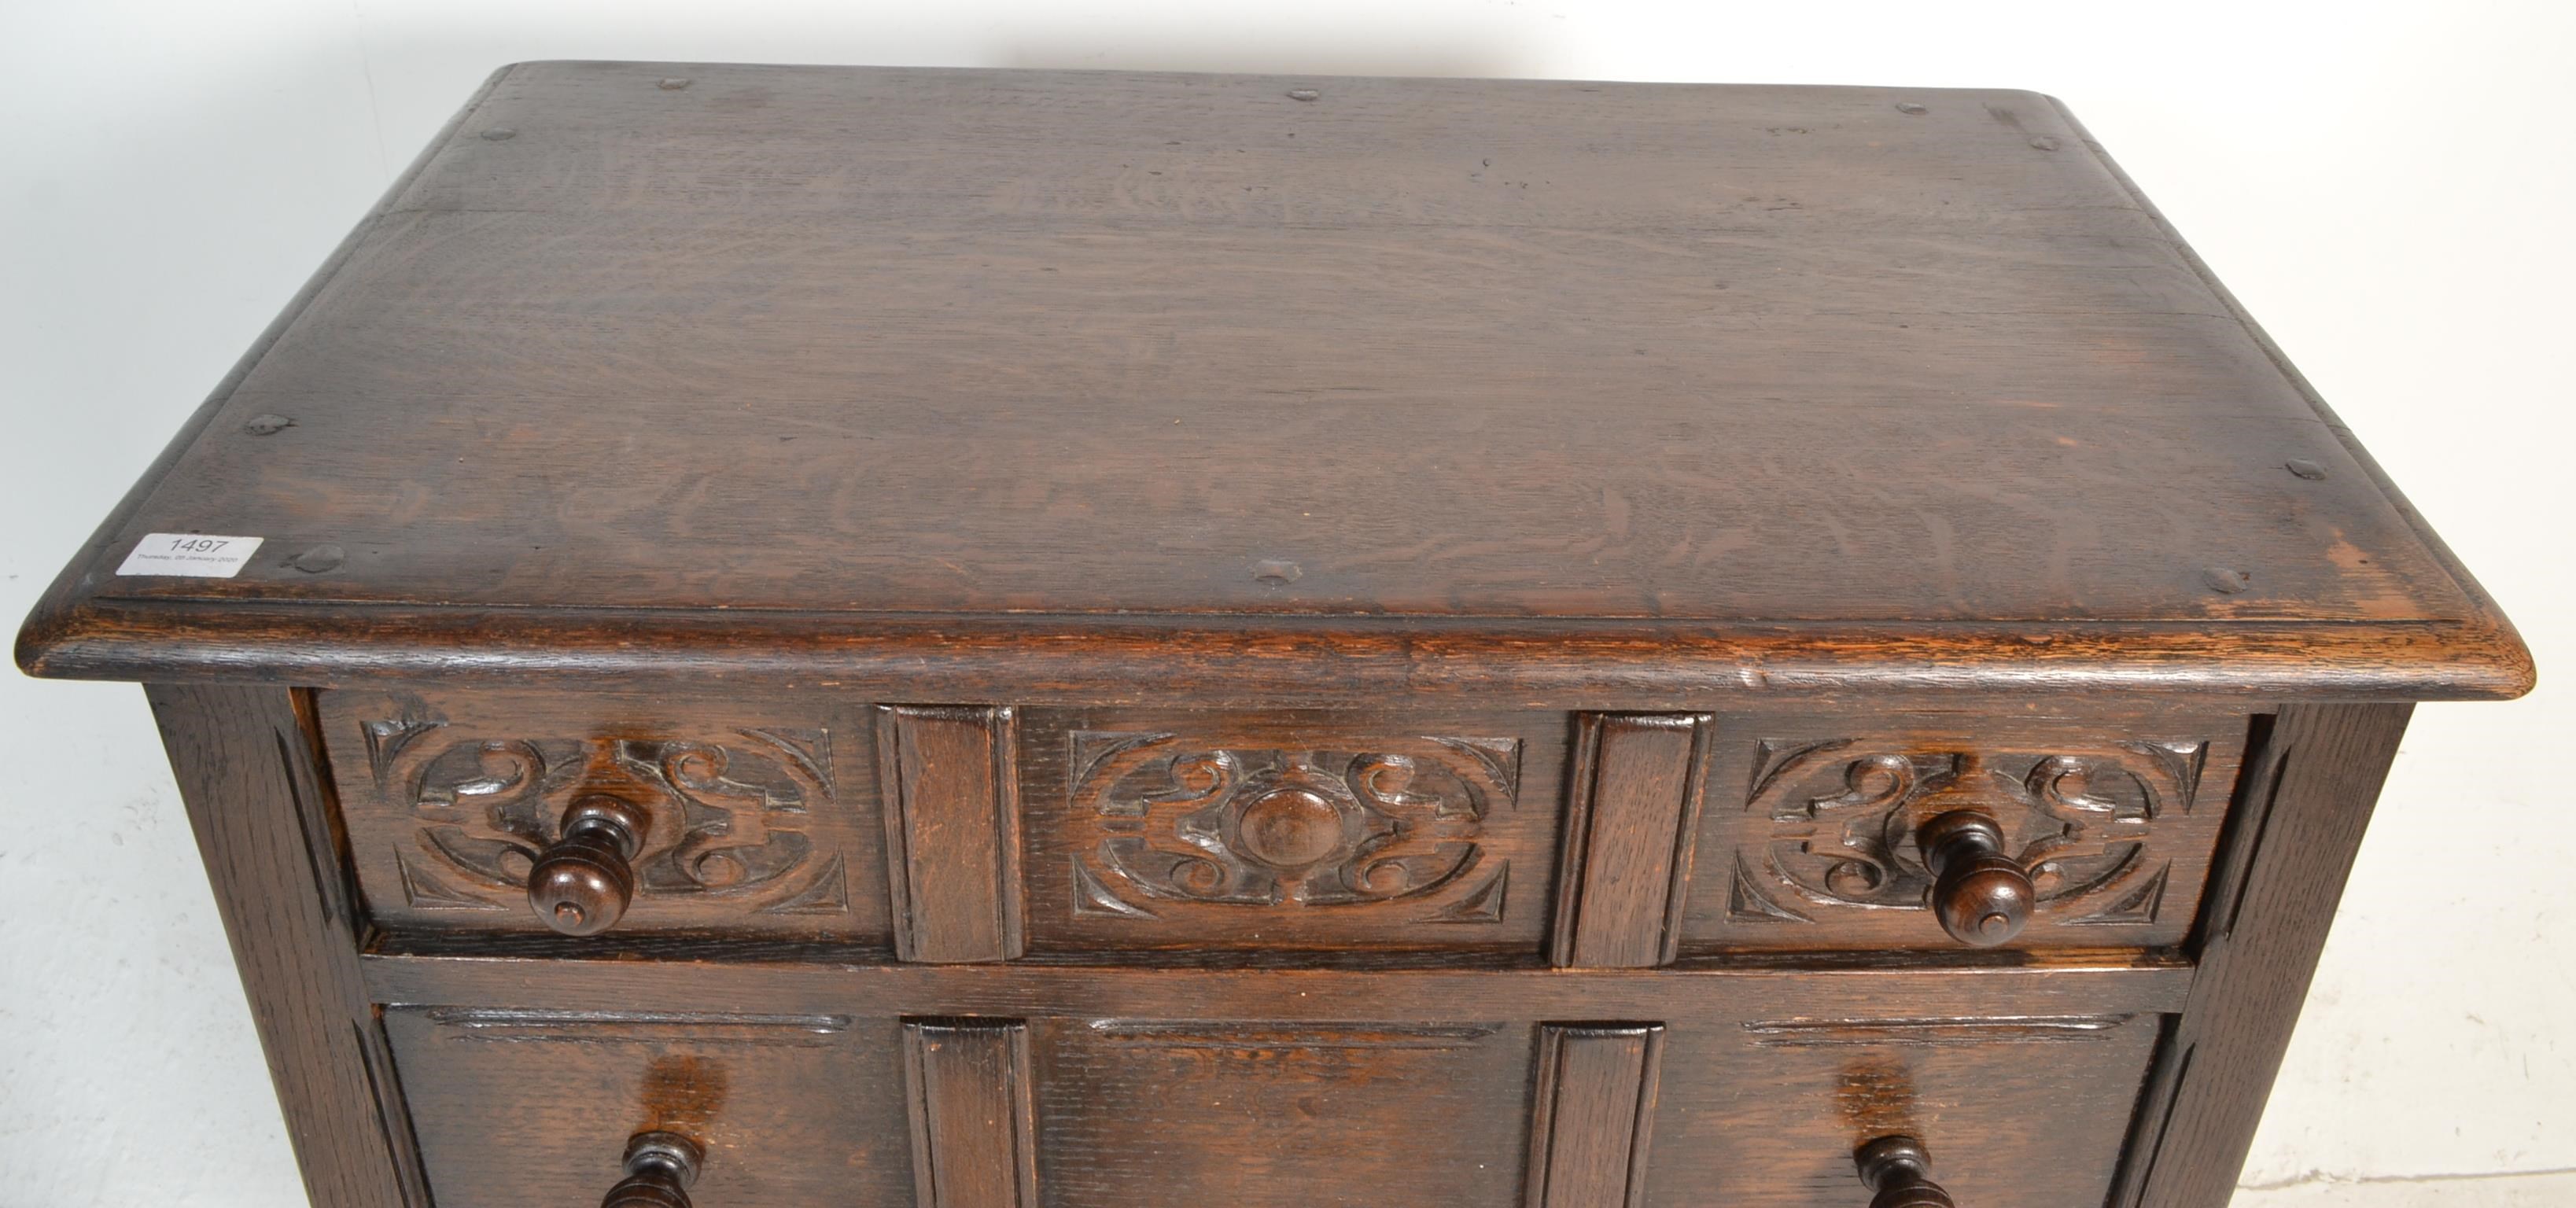 A Queen Anne revival oak chest of drawers on stand. Raised on cup and cover legs with peripheral - Image 3 of 5